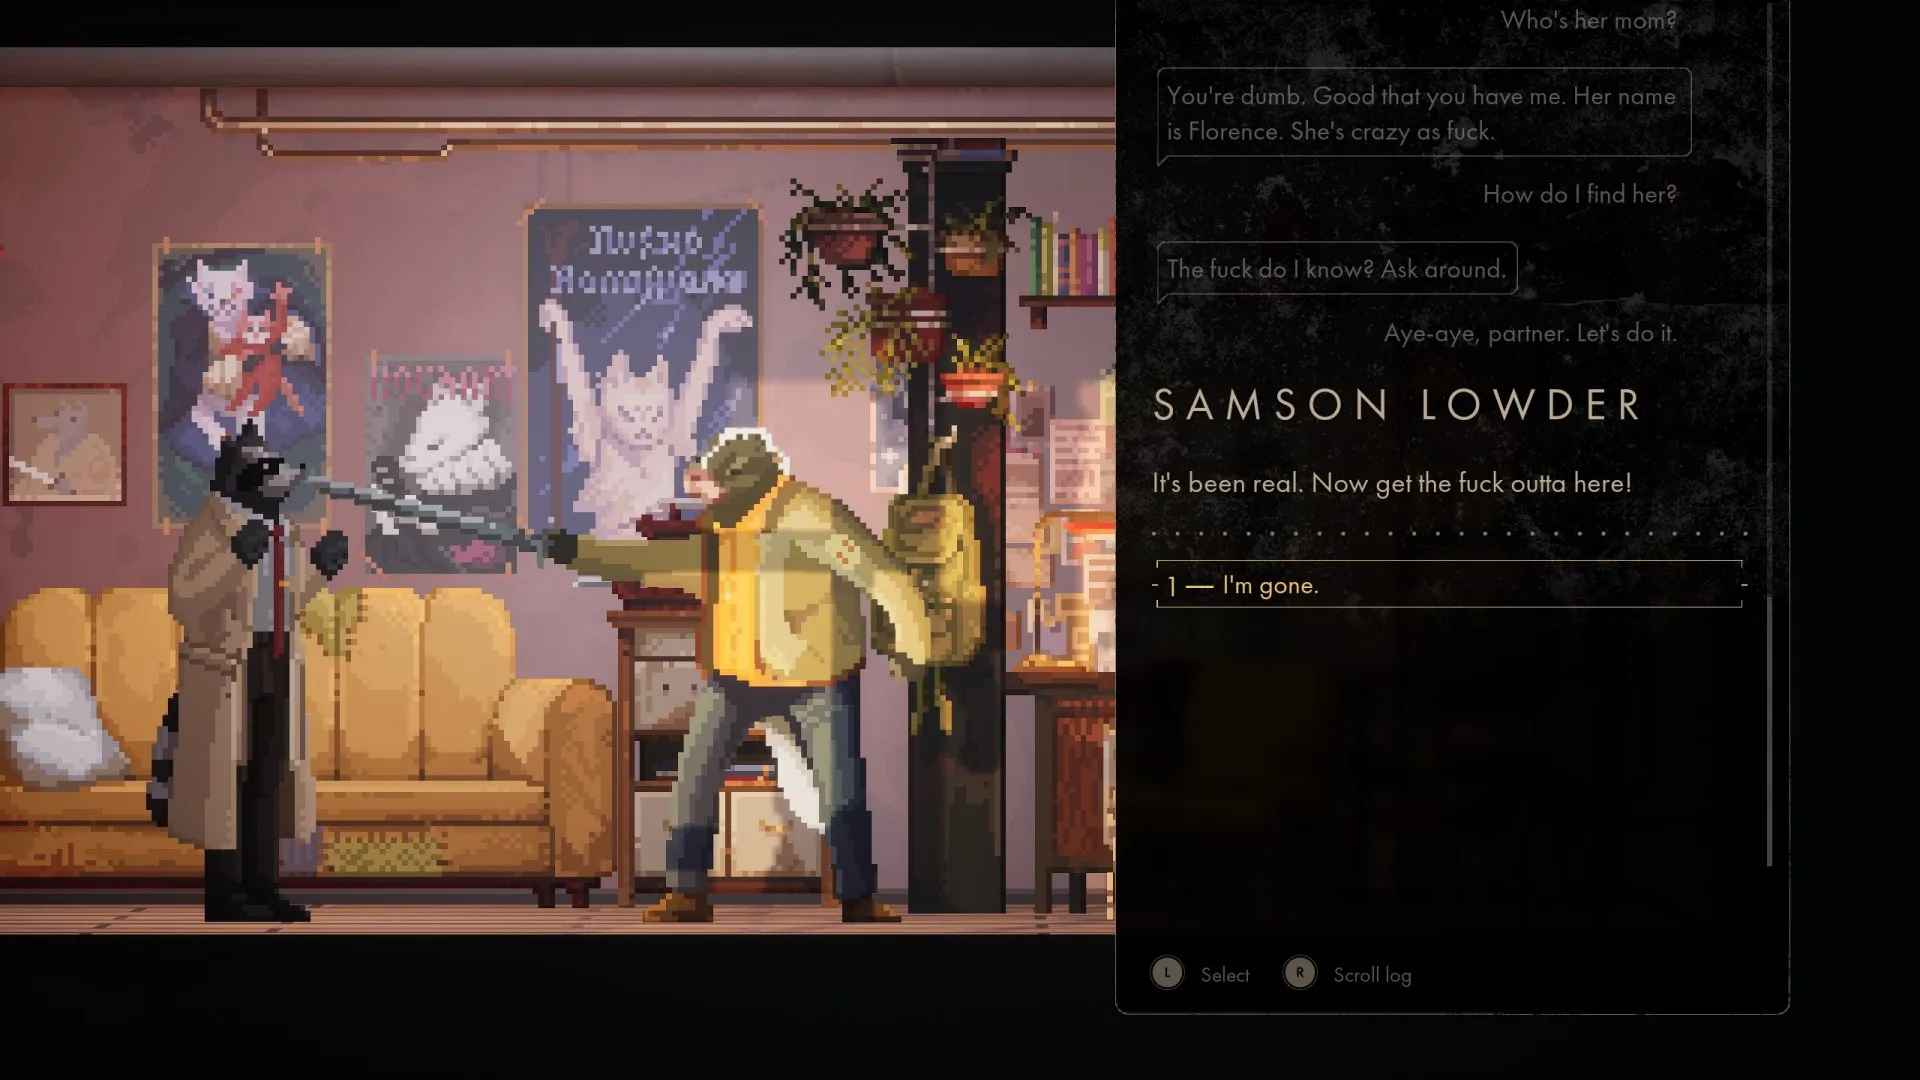 The left side of the image shows Howard, a raccoon in a trenchcoat with his paws up, and Samson, a skunk in a yellow button up and jacket, and jeans, pointing a rifle at Howard's nose.

The dialogue on the right shows Howard asking, "Who's her mom?" Samson replies, "You're dumb. Good that you have me. Her name is Florence. She's crazy as fuck."
"How do I find her?"
"The fuck do I know? Ask around."
"Aye-aye, partner. Let's do it."
"It's been real. Now get the fuck outta here!"
"I'm gone."